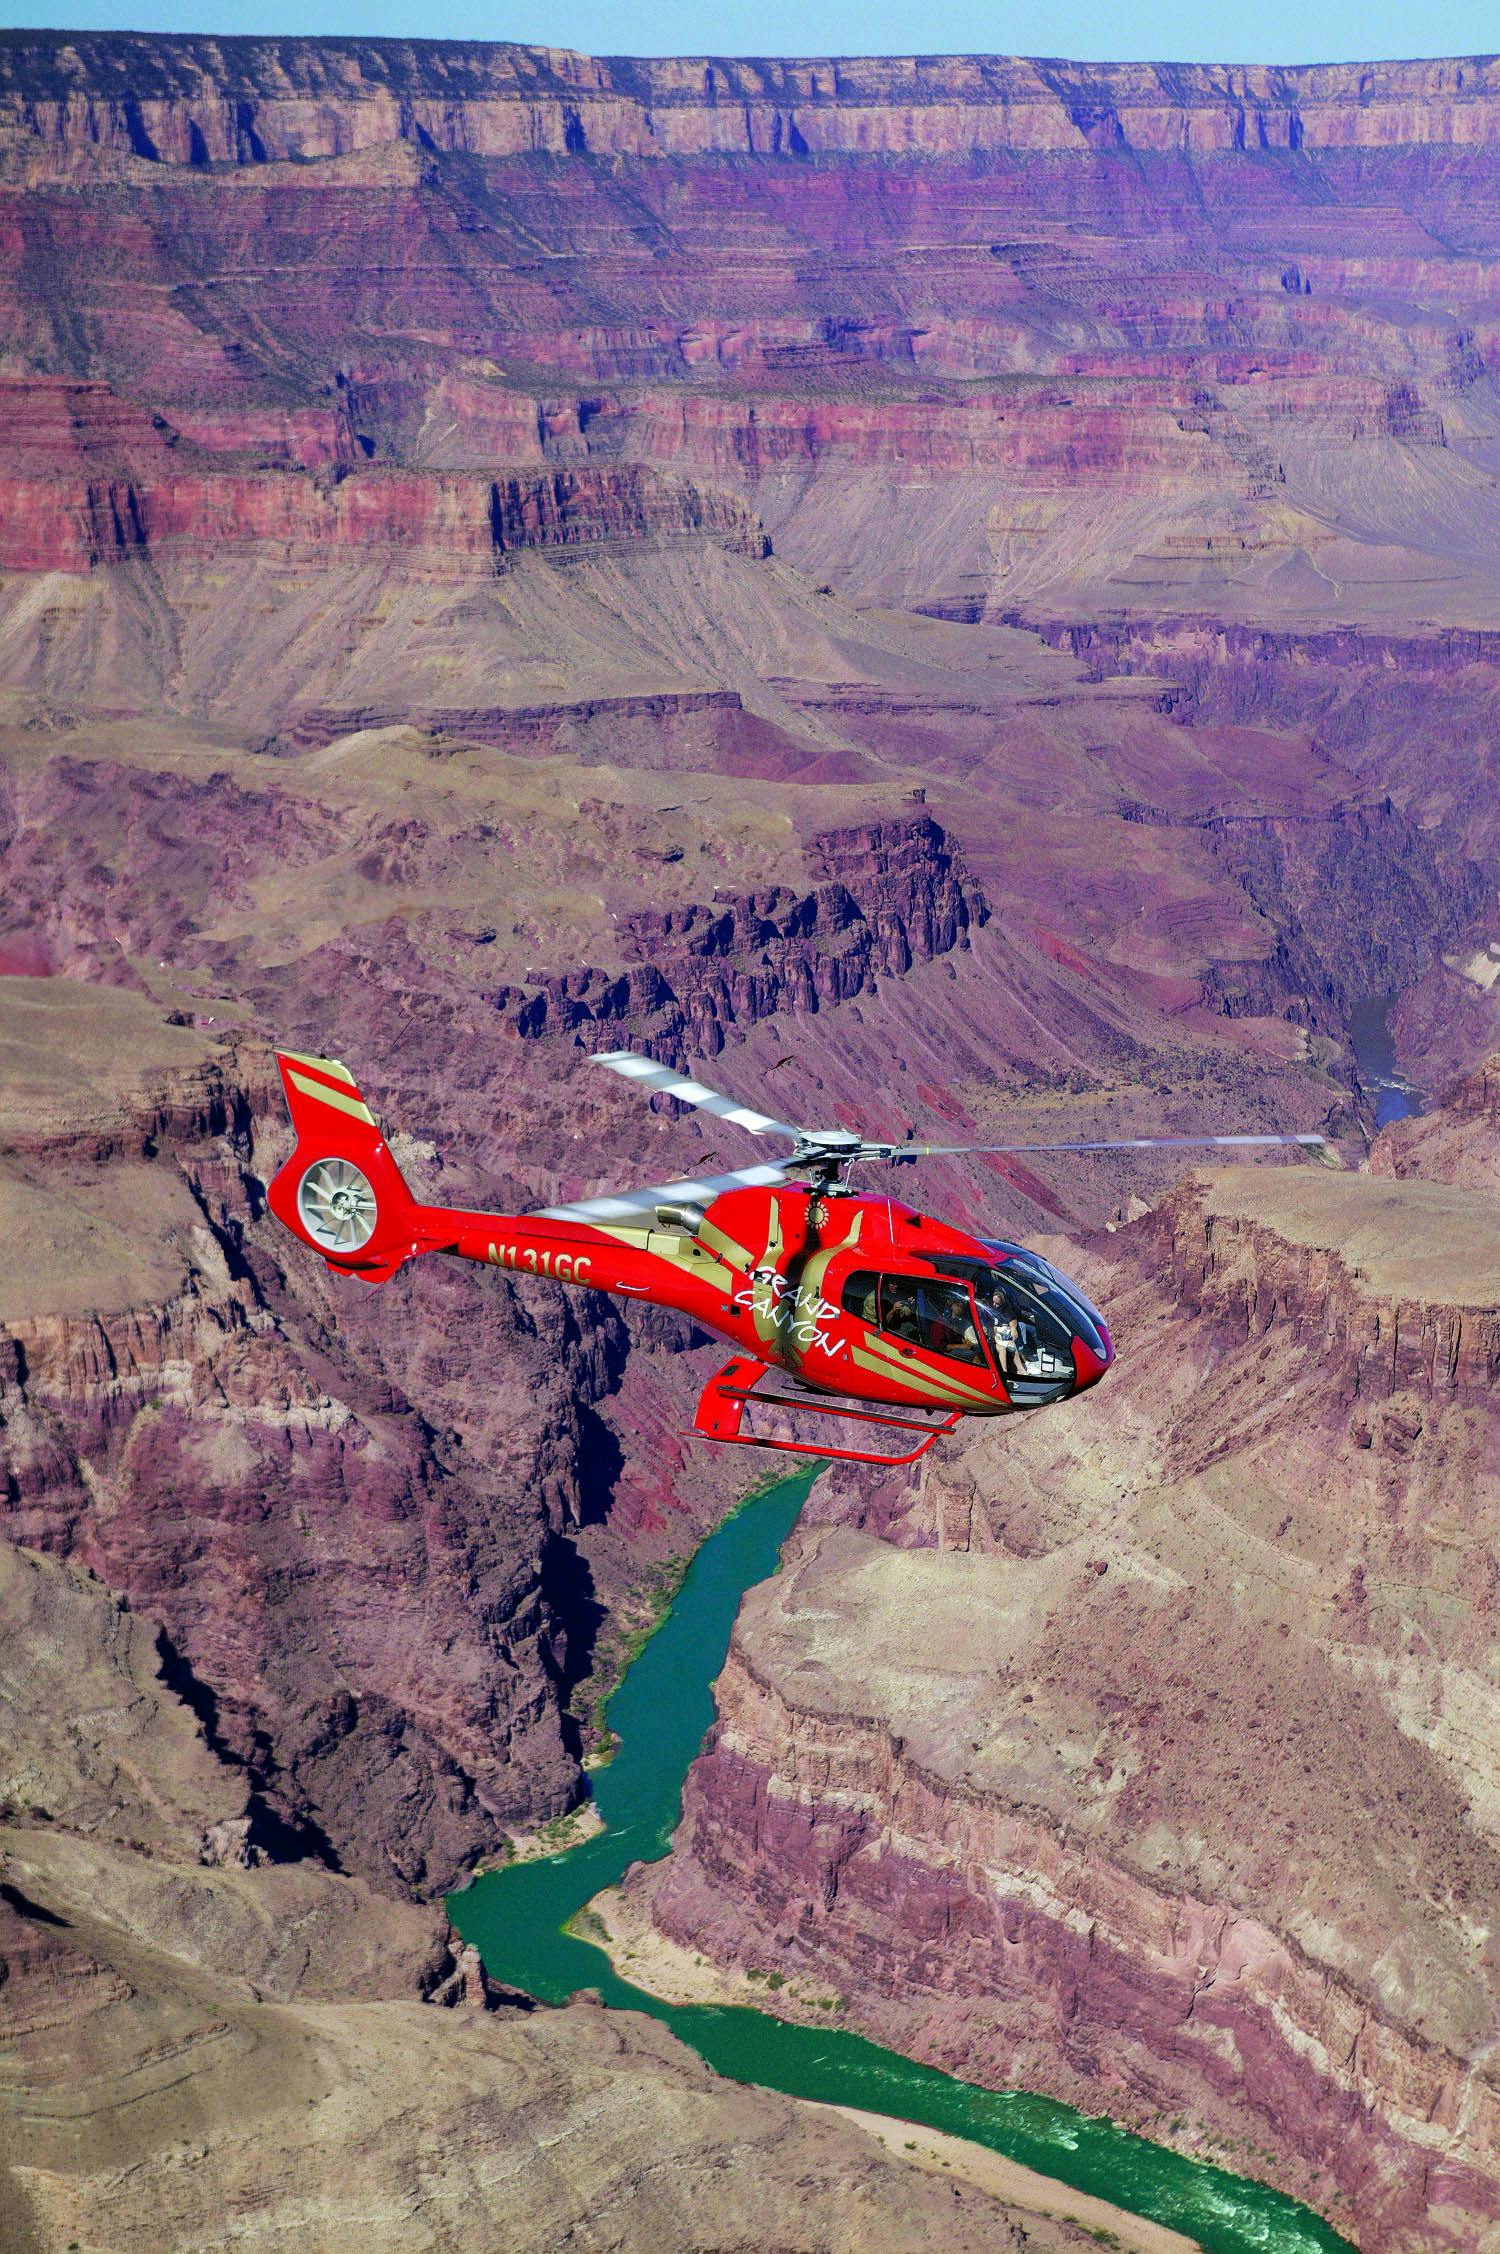 Grand Canyon South Rim bus tour and helicopter ride